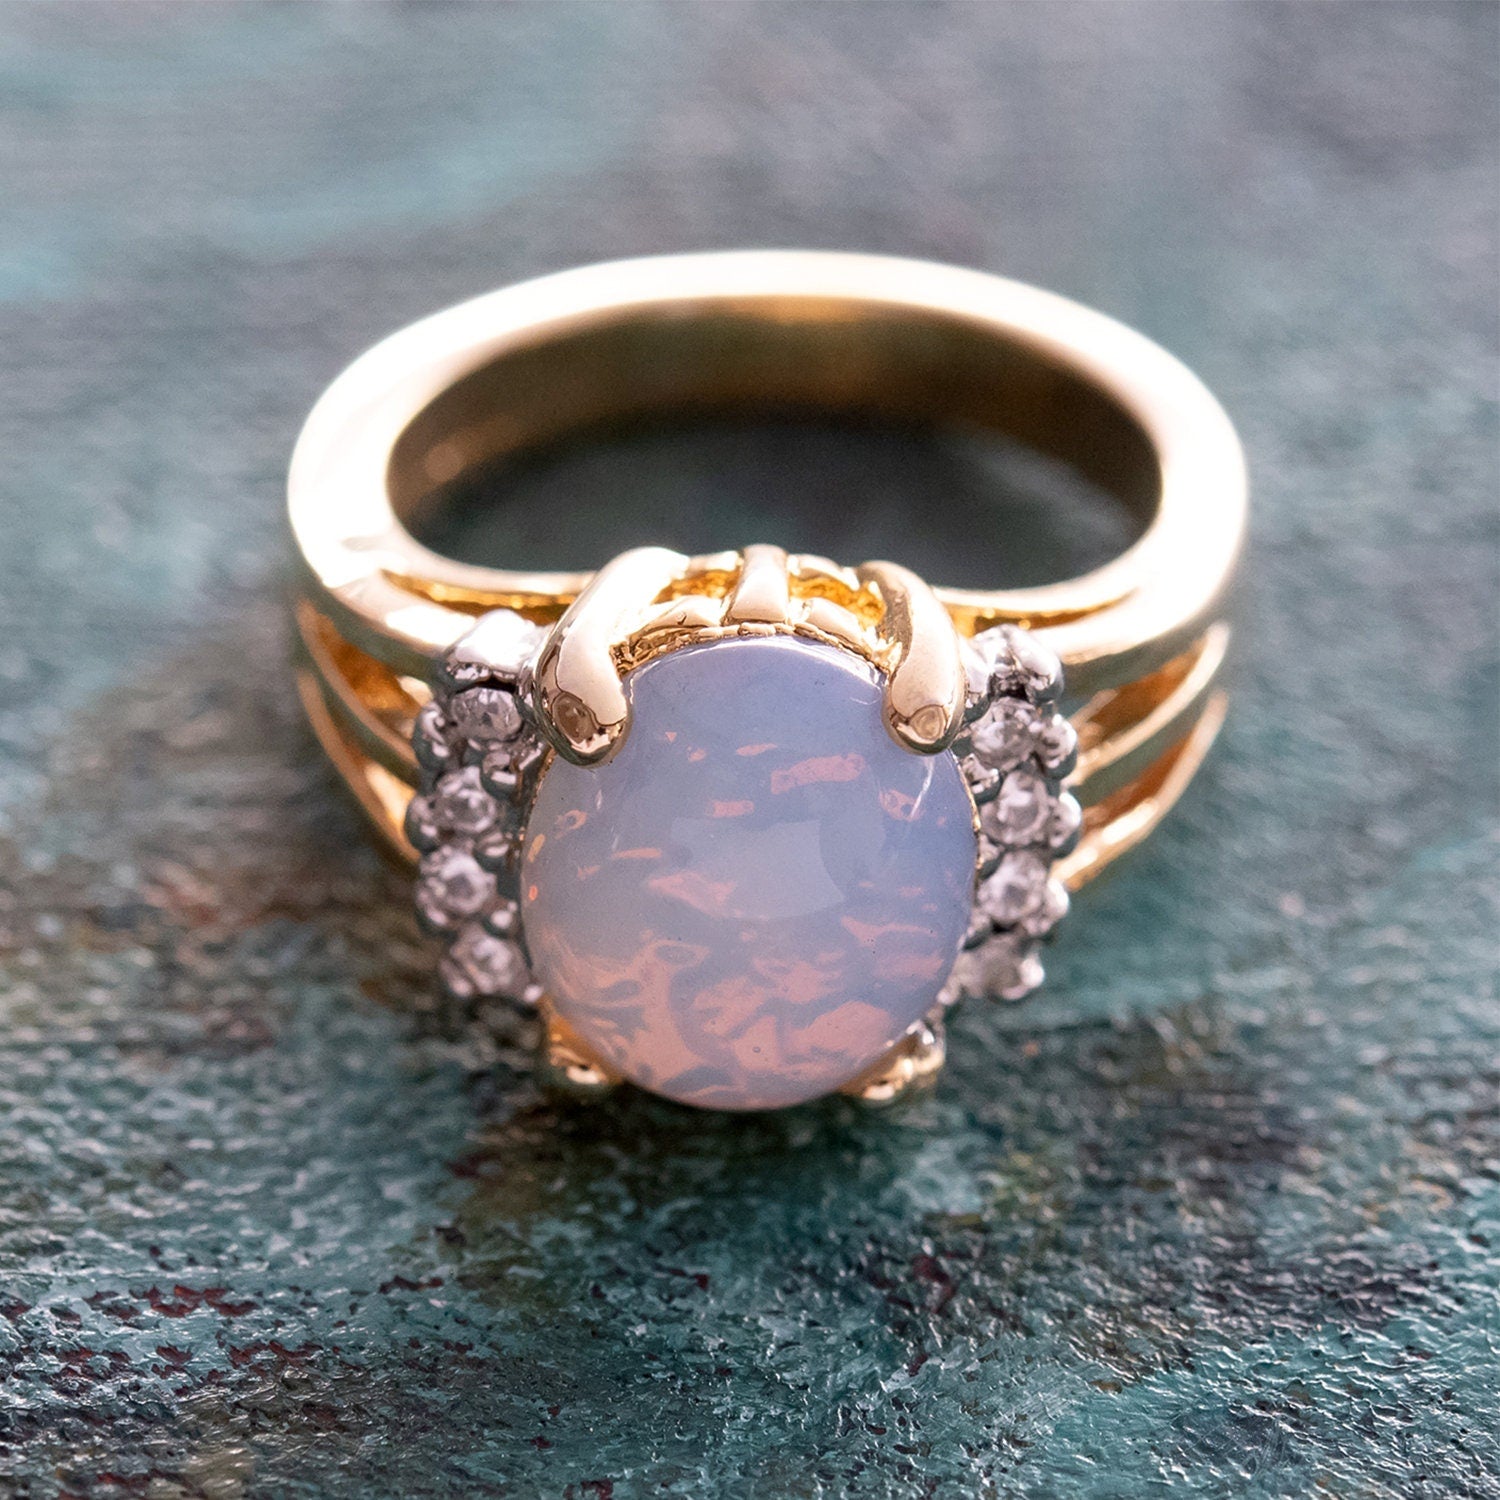 Vintage Ring 1980's Jelly Opal Ring with Clear Swarovski Crystals 18k Gold Antique Womans Jewelry R1664 - Limited Stock - Never Worn